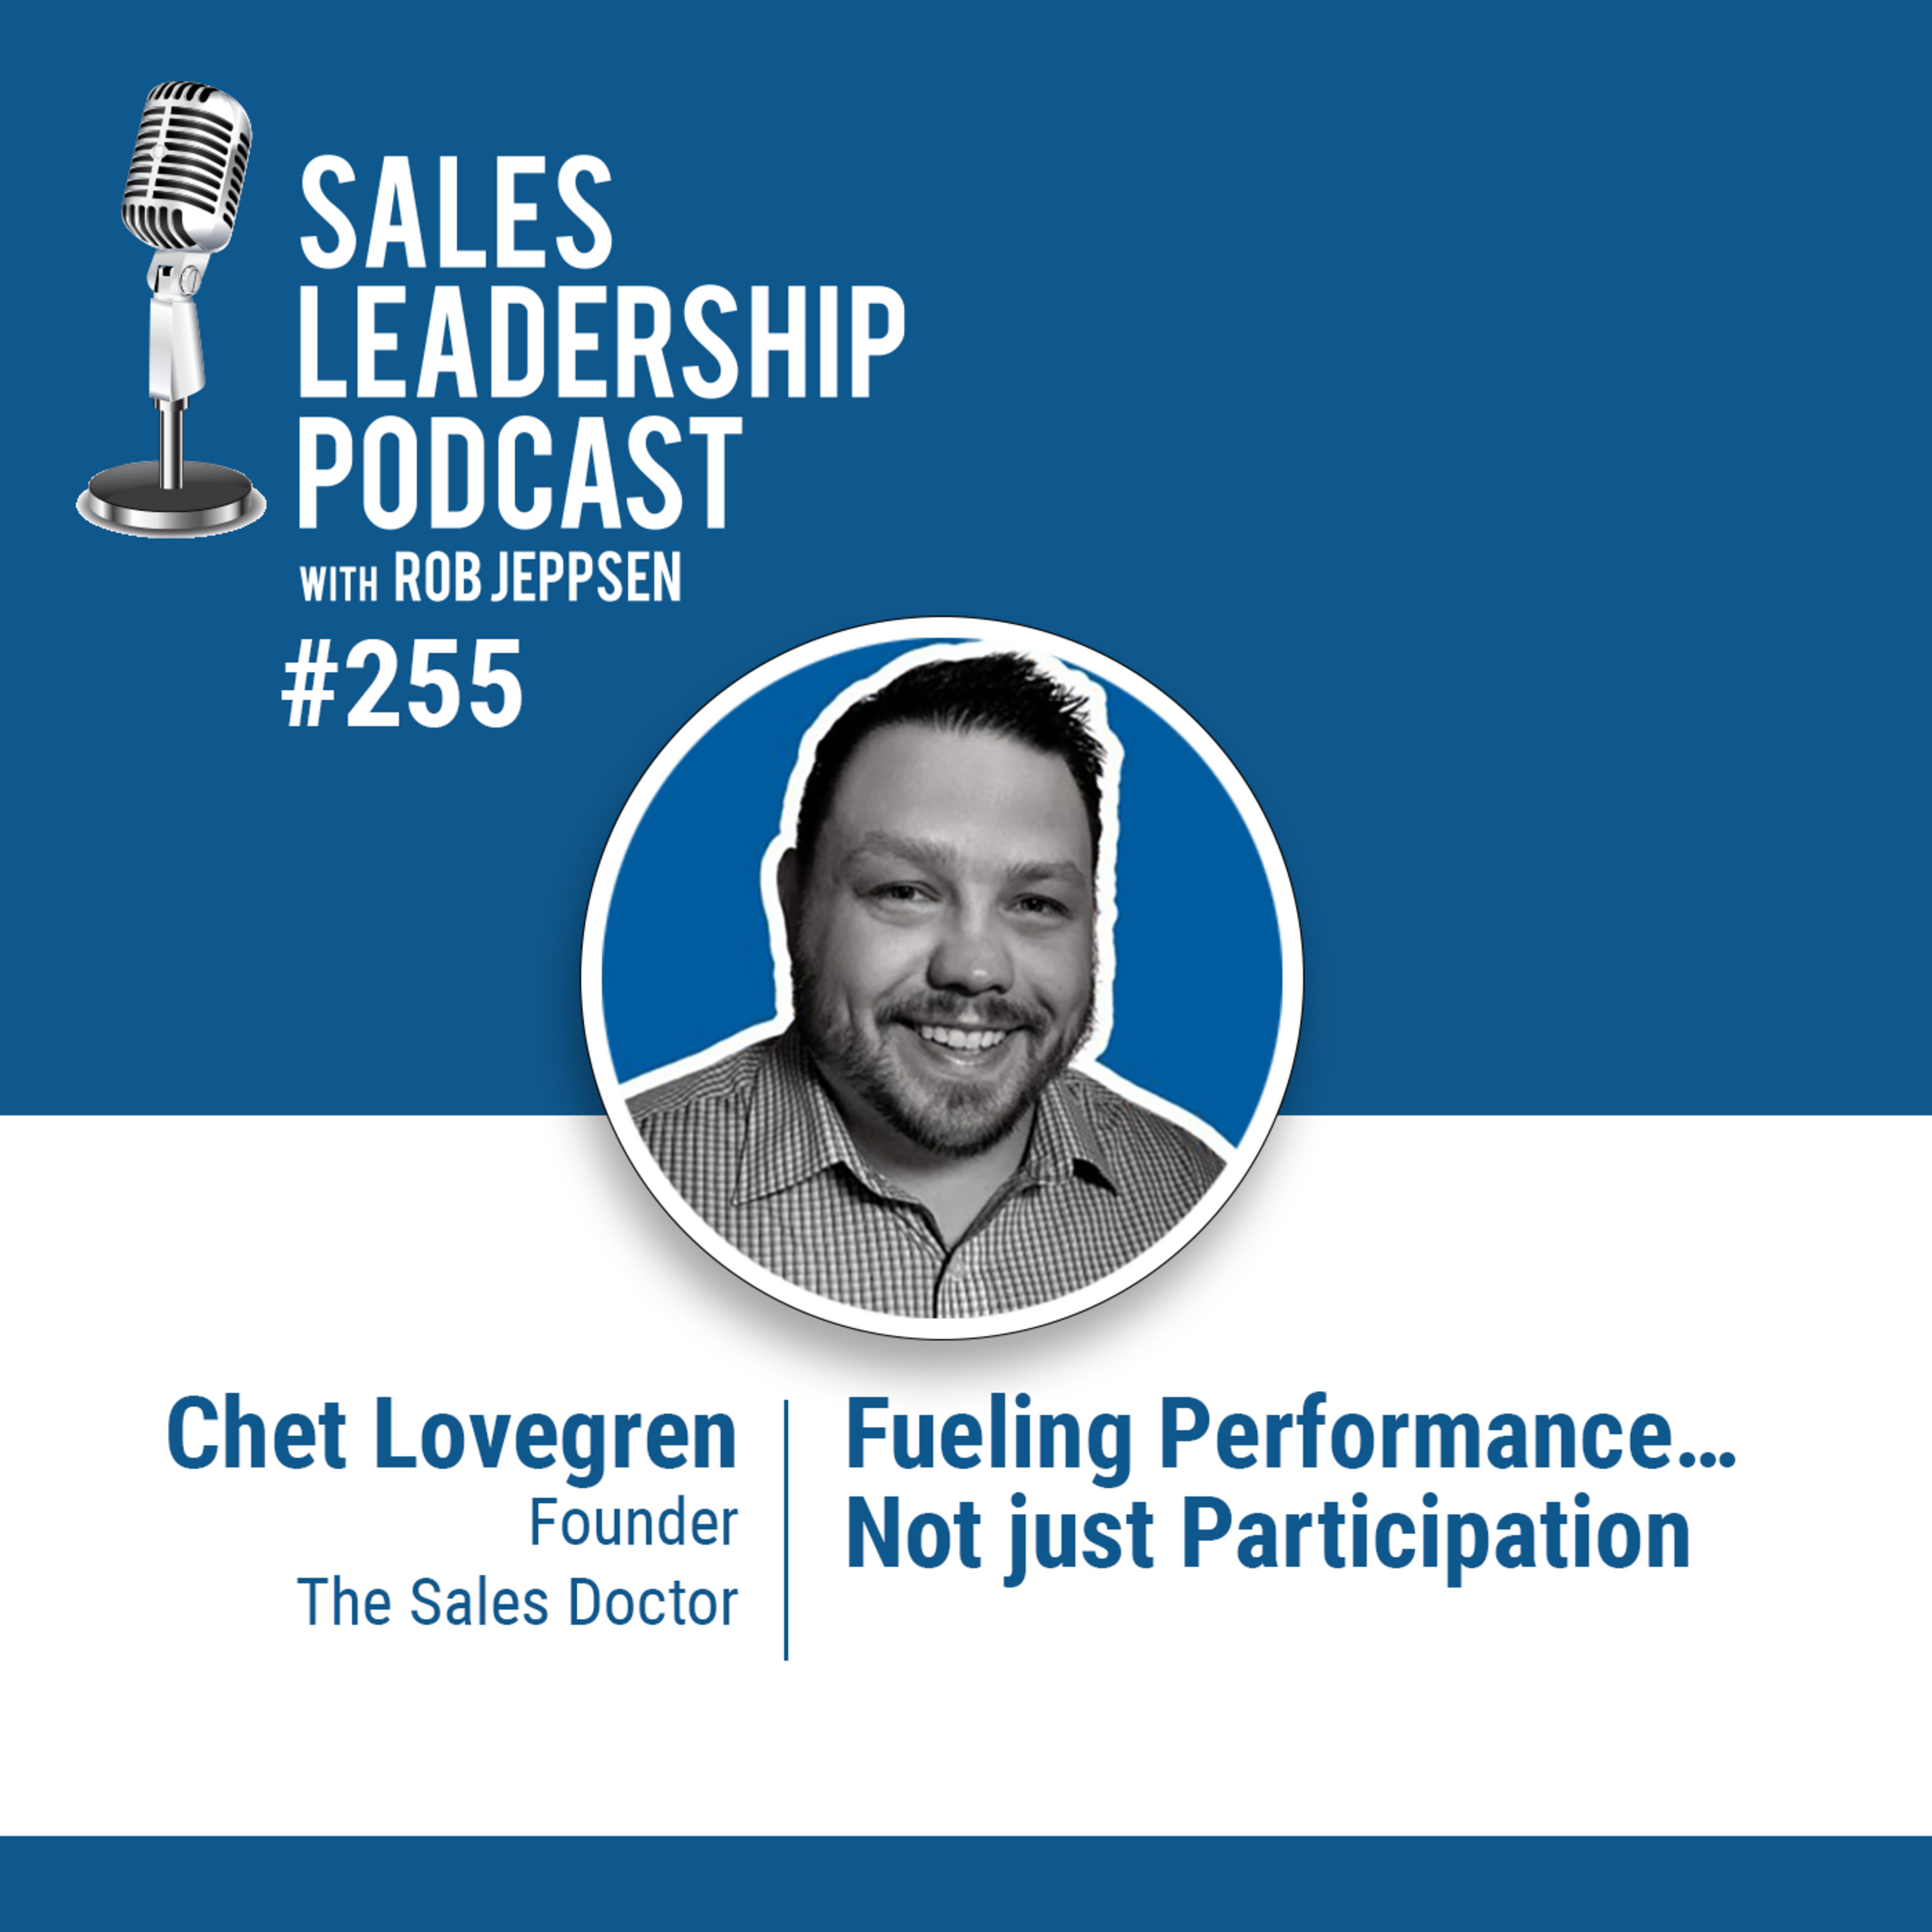 Episode 255: Chet Lovegren AKA The Sales Doctor - Fueling Performance…not just Participation